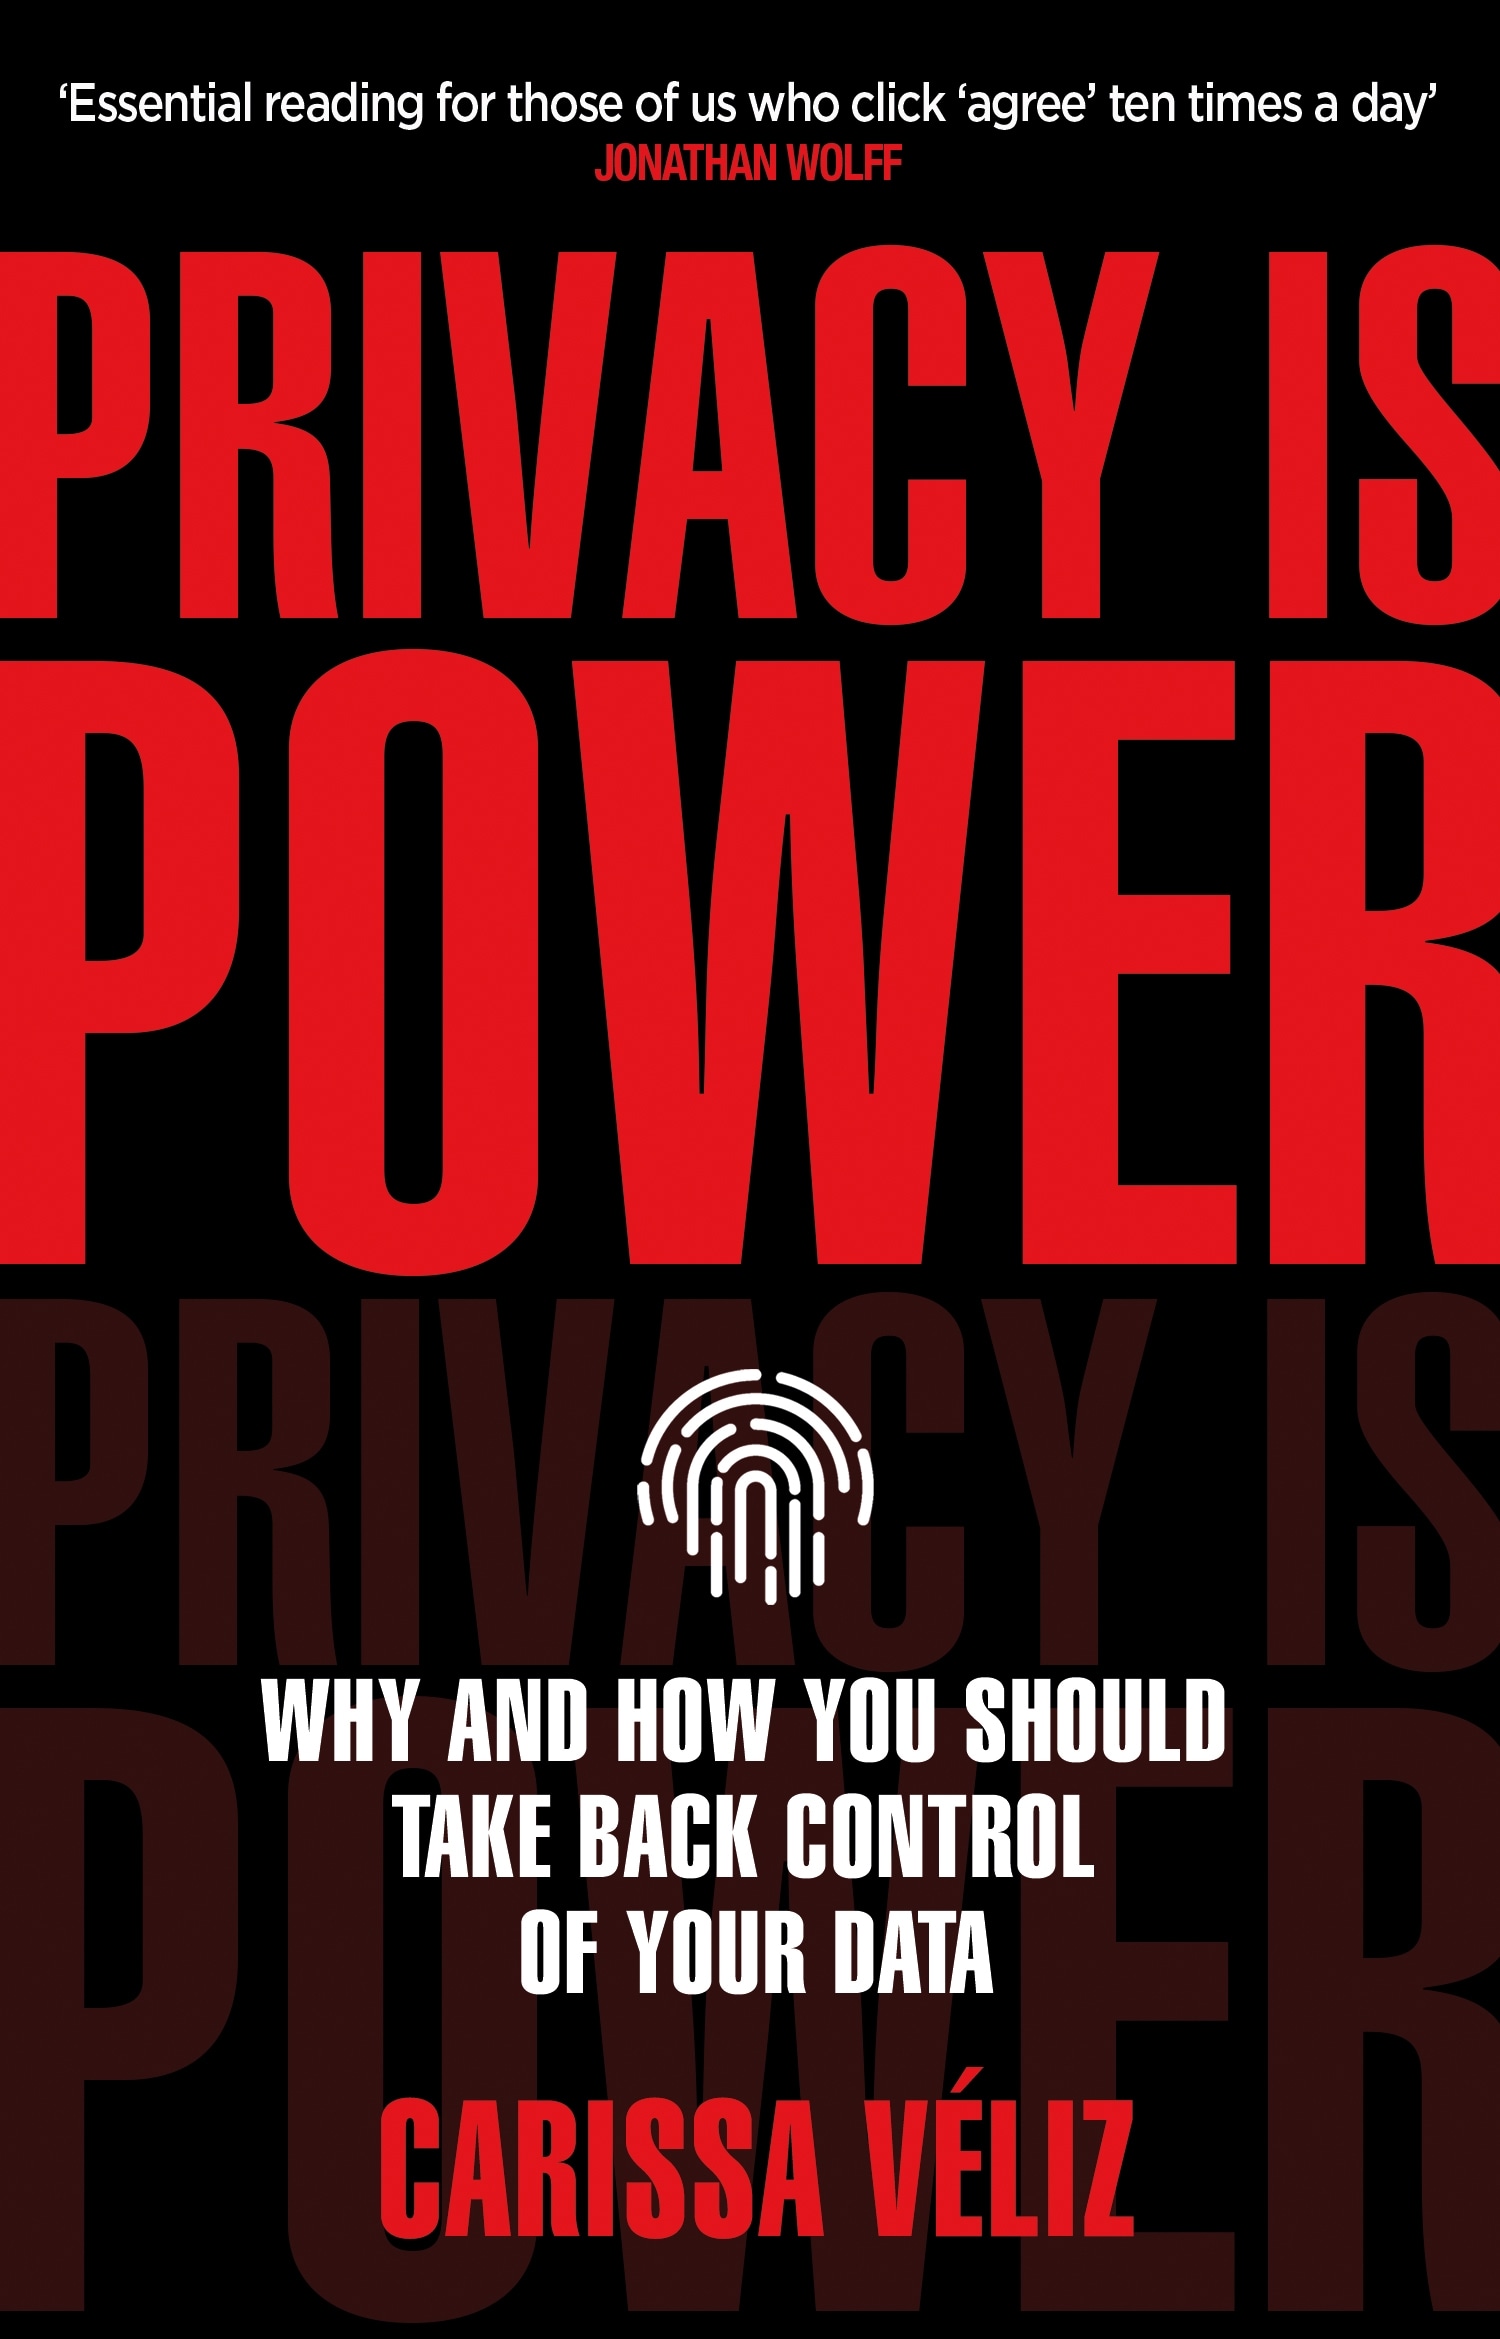 Book “Privacy is Power” by Carissa Véliz — July 1, 2021